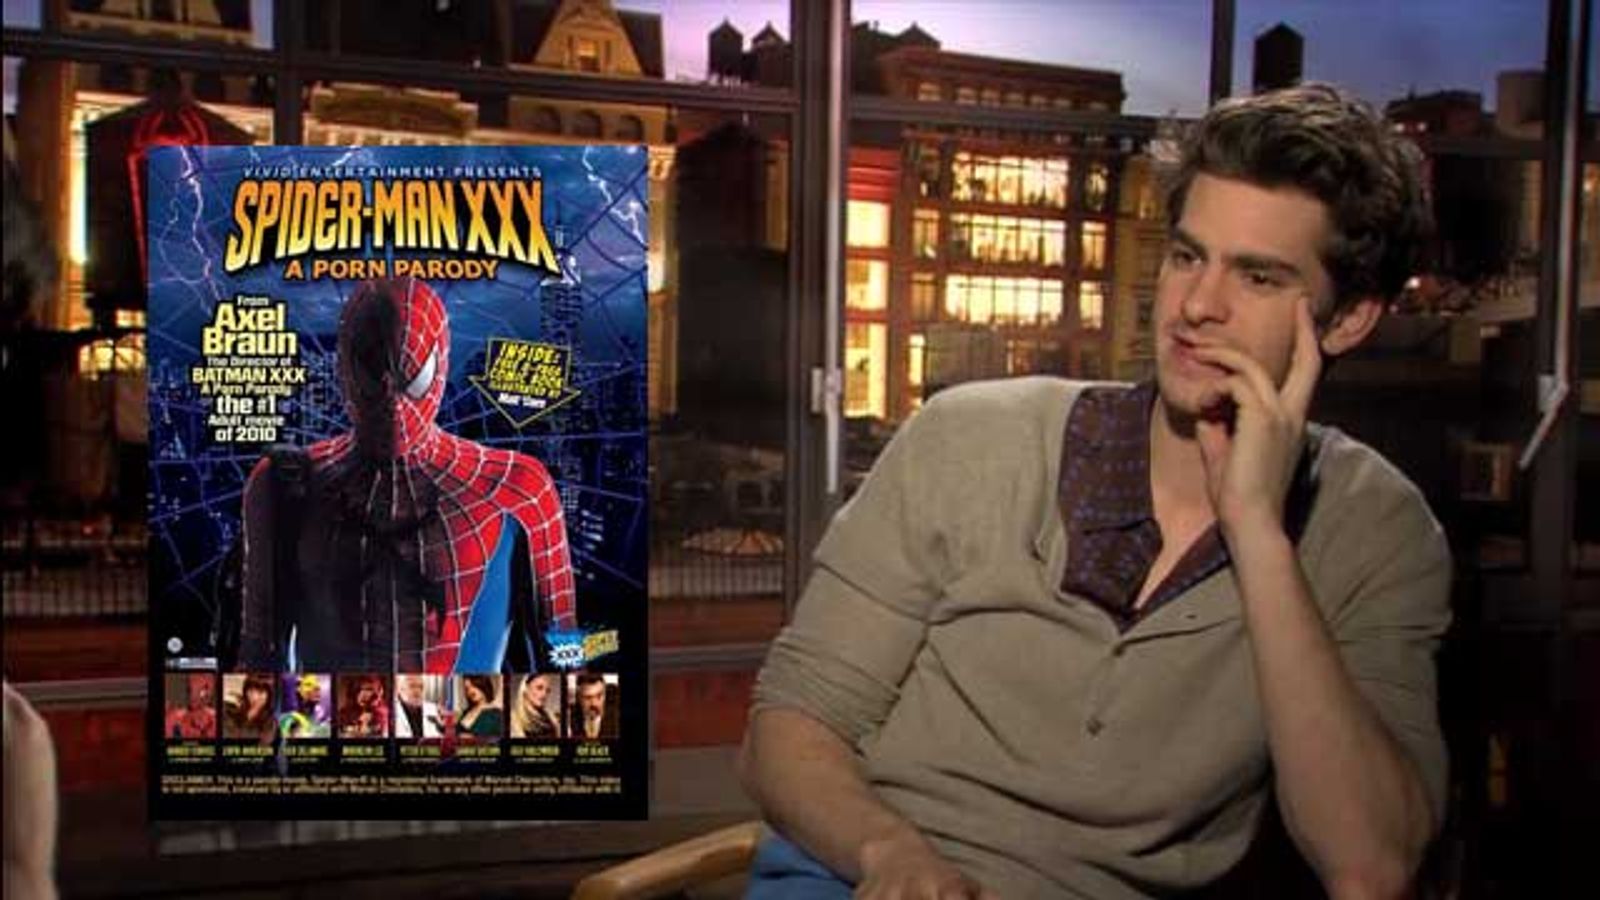 Andrew 'Spider-Man' Garfield Watched Vivid Parody for Inspiration